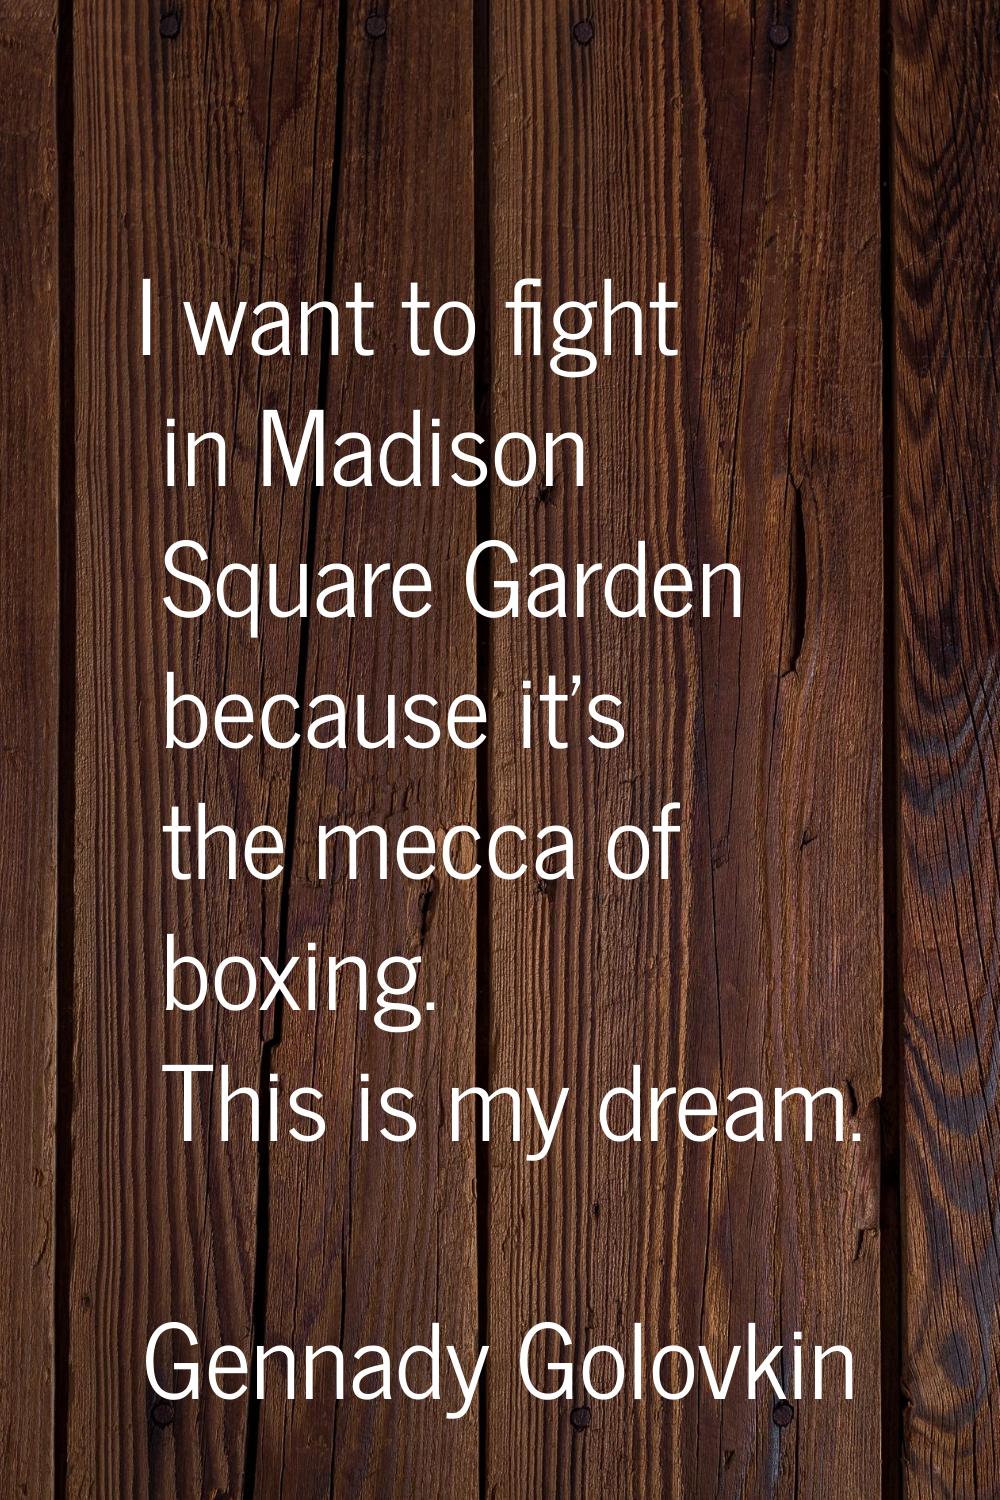 I want to fight in Madison Square Garden because it's the mecca of boxing. This is my dream.